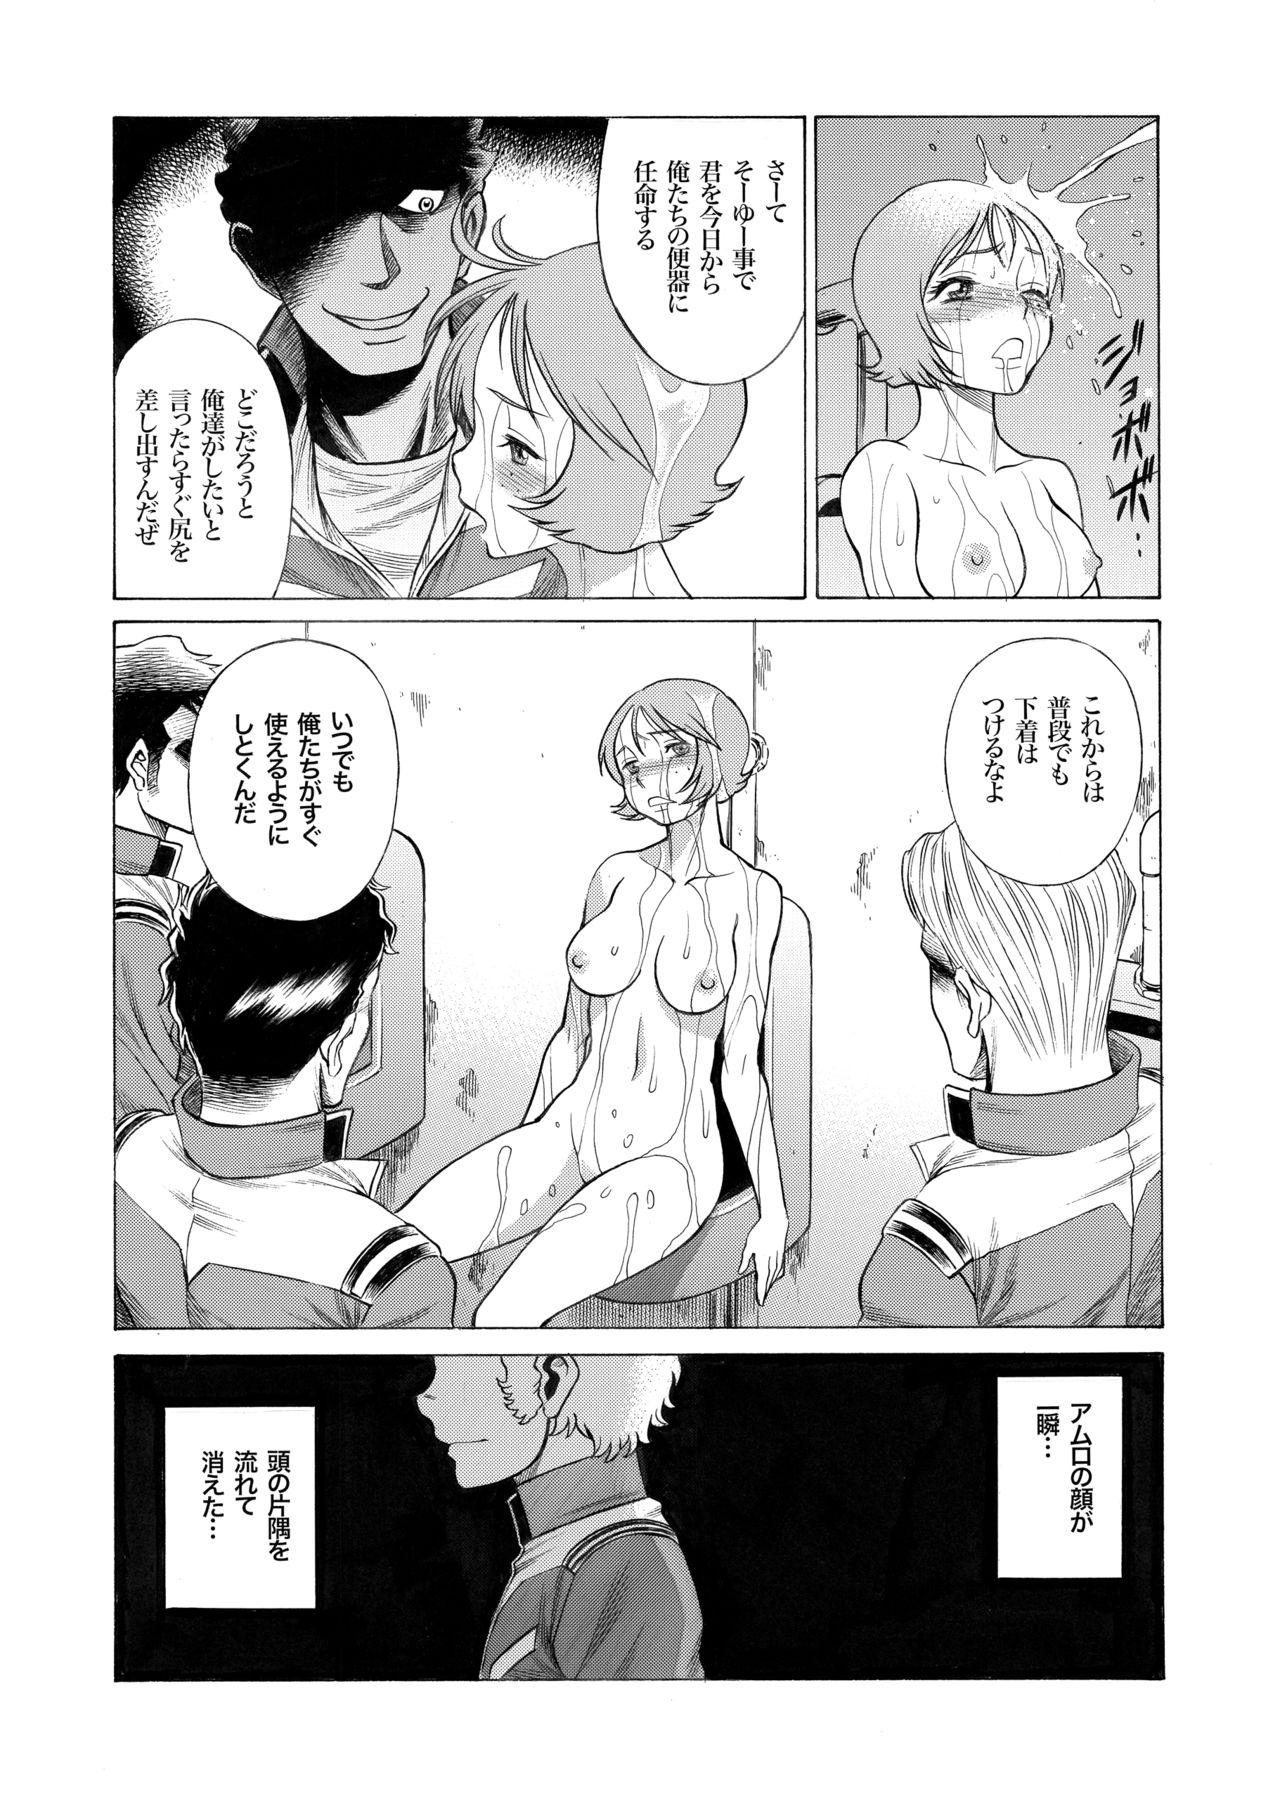 Thuylinh Reijoh - Mobile suit gundam Cock - Page 7